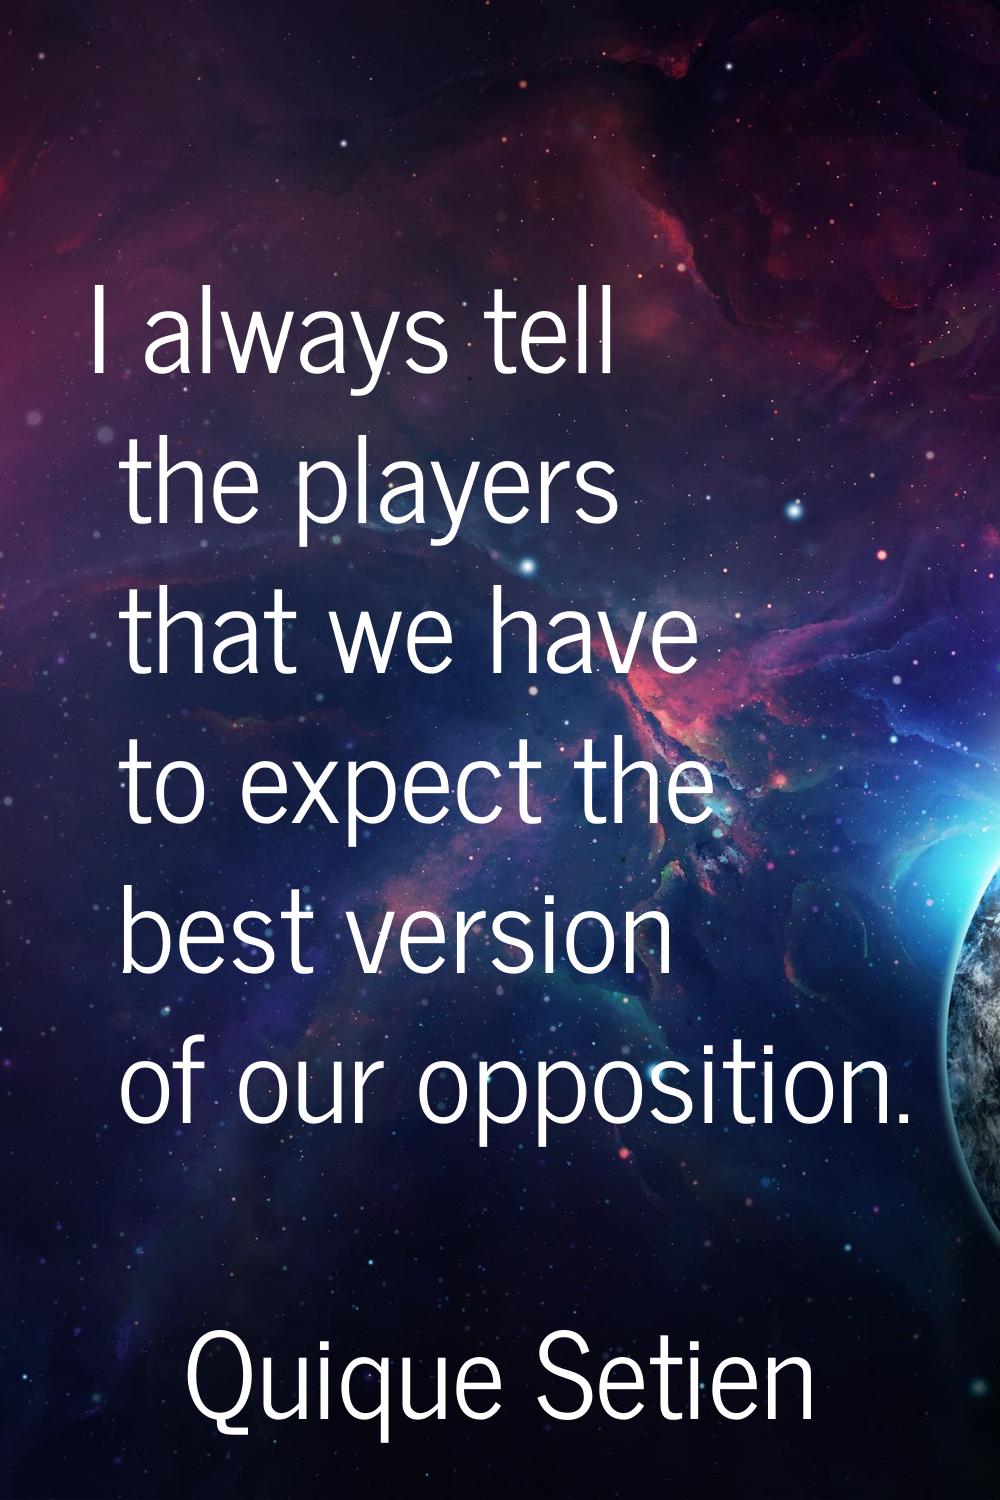 I always tell the players that we have to expect the best version of our opposition.